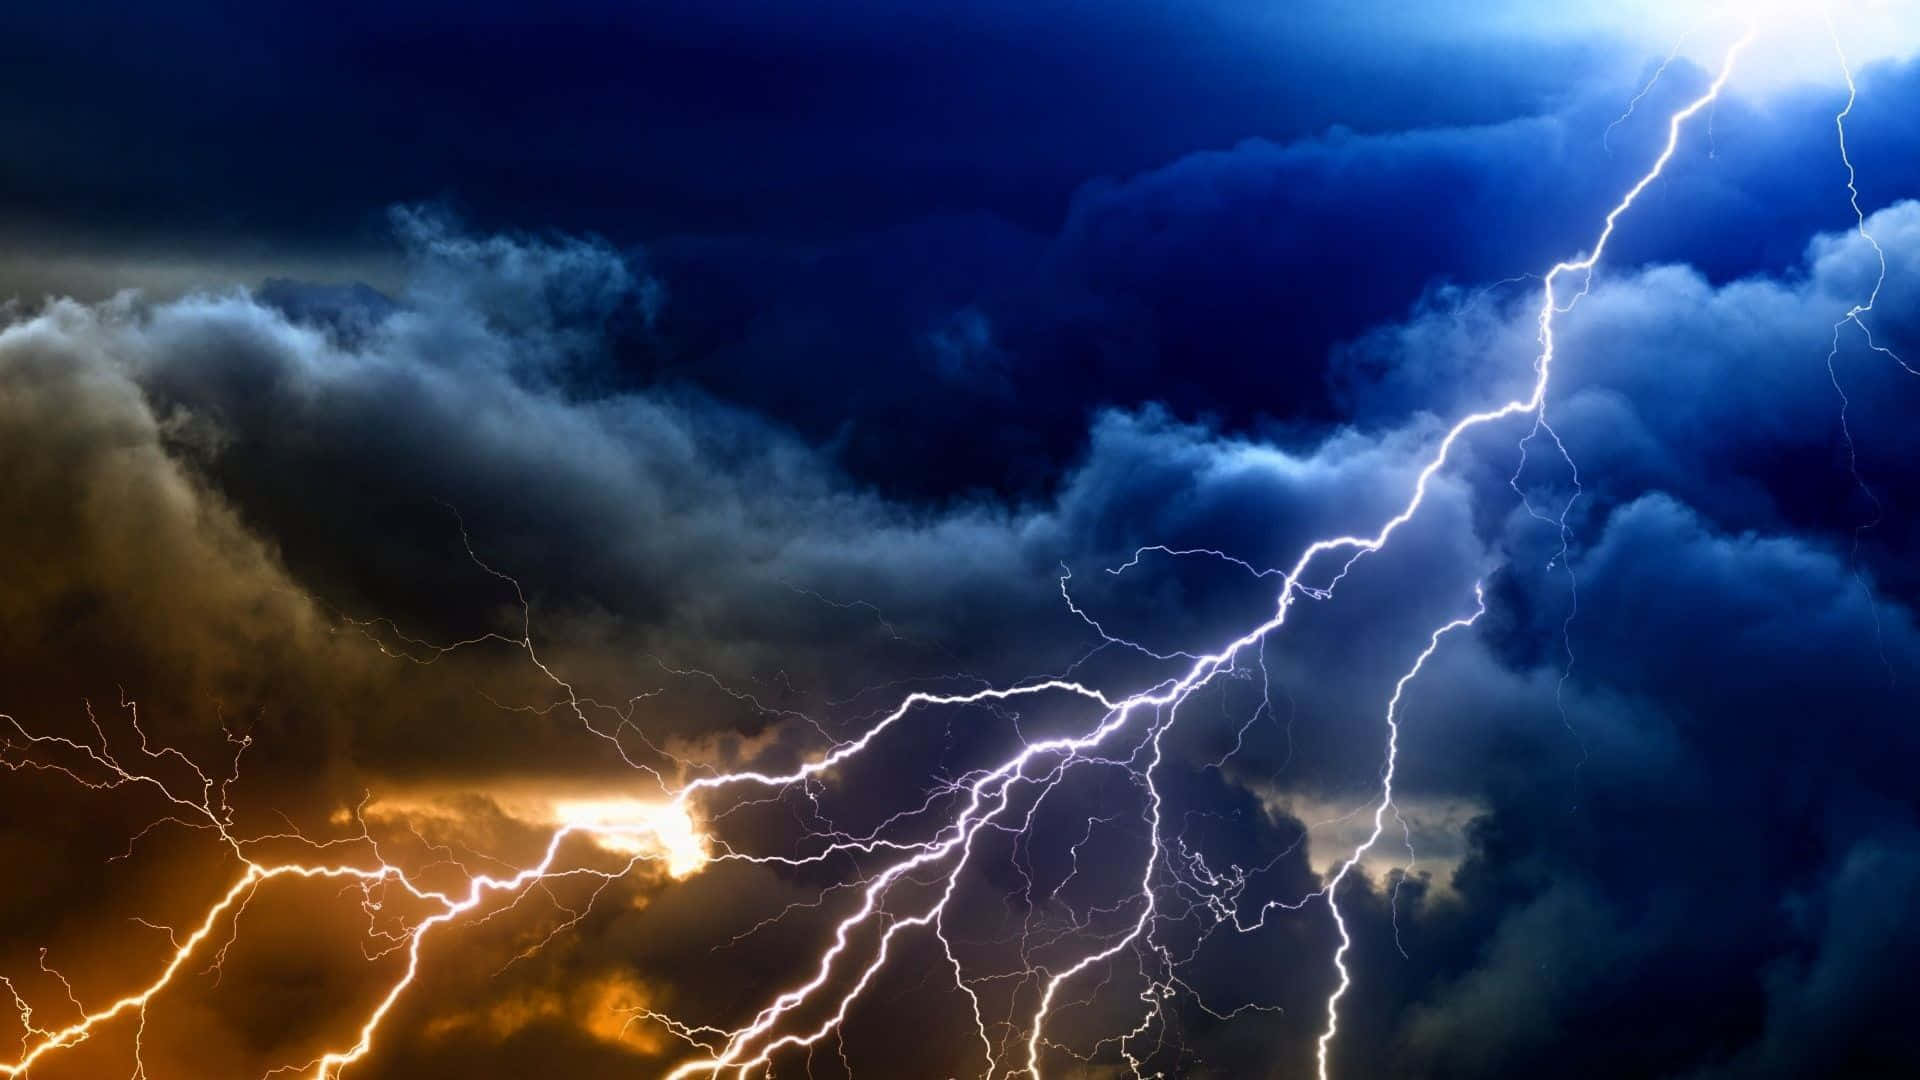 Experience the power of nature, feel the Blue Lightning! Wallpaper